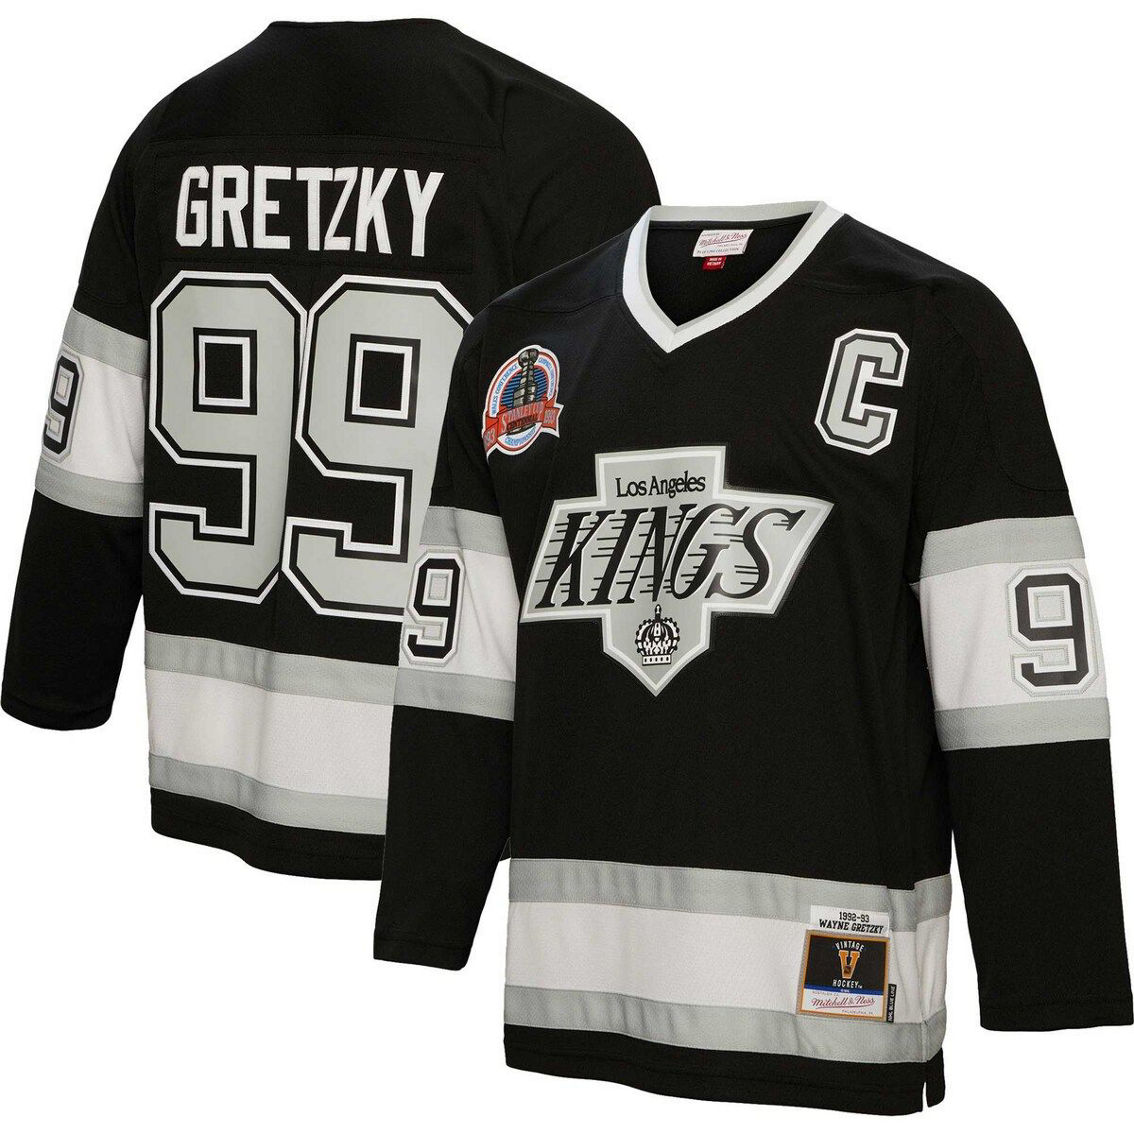 Mitchell & Ness Men's Wayne Gretzky Black Los Angeles Kings 1992/93 Captain Patch Blue Line Player Jersey - Image 2 of 4